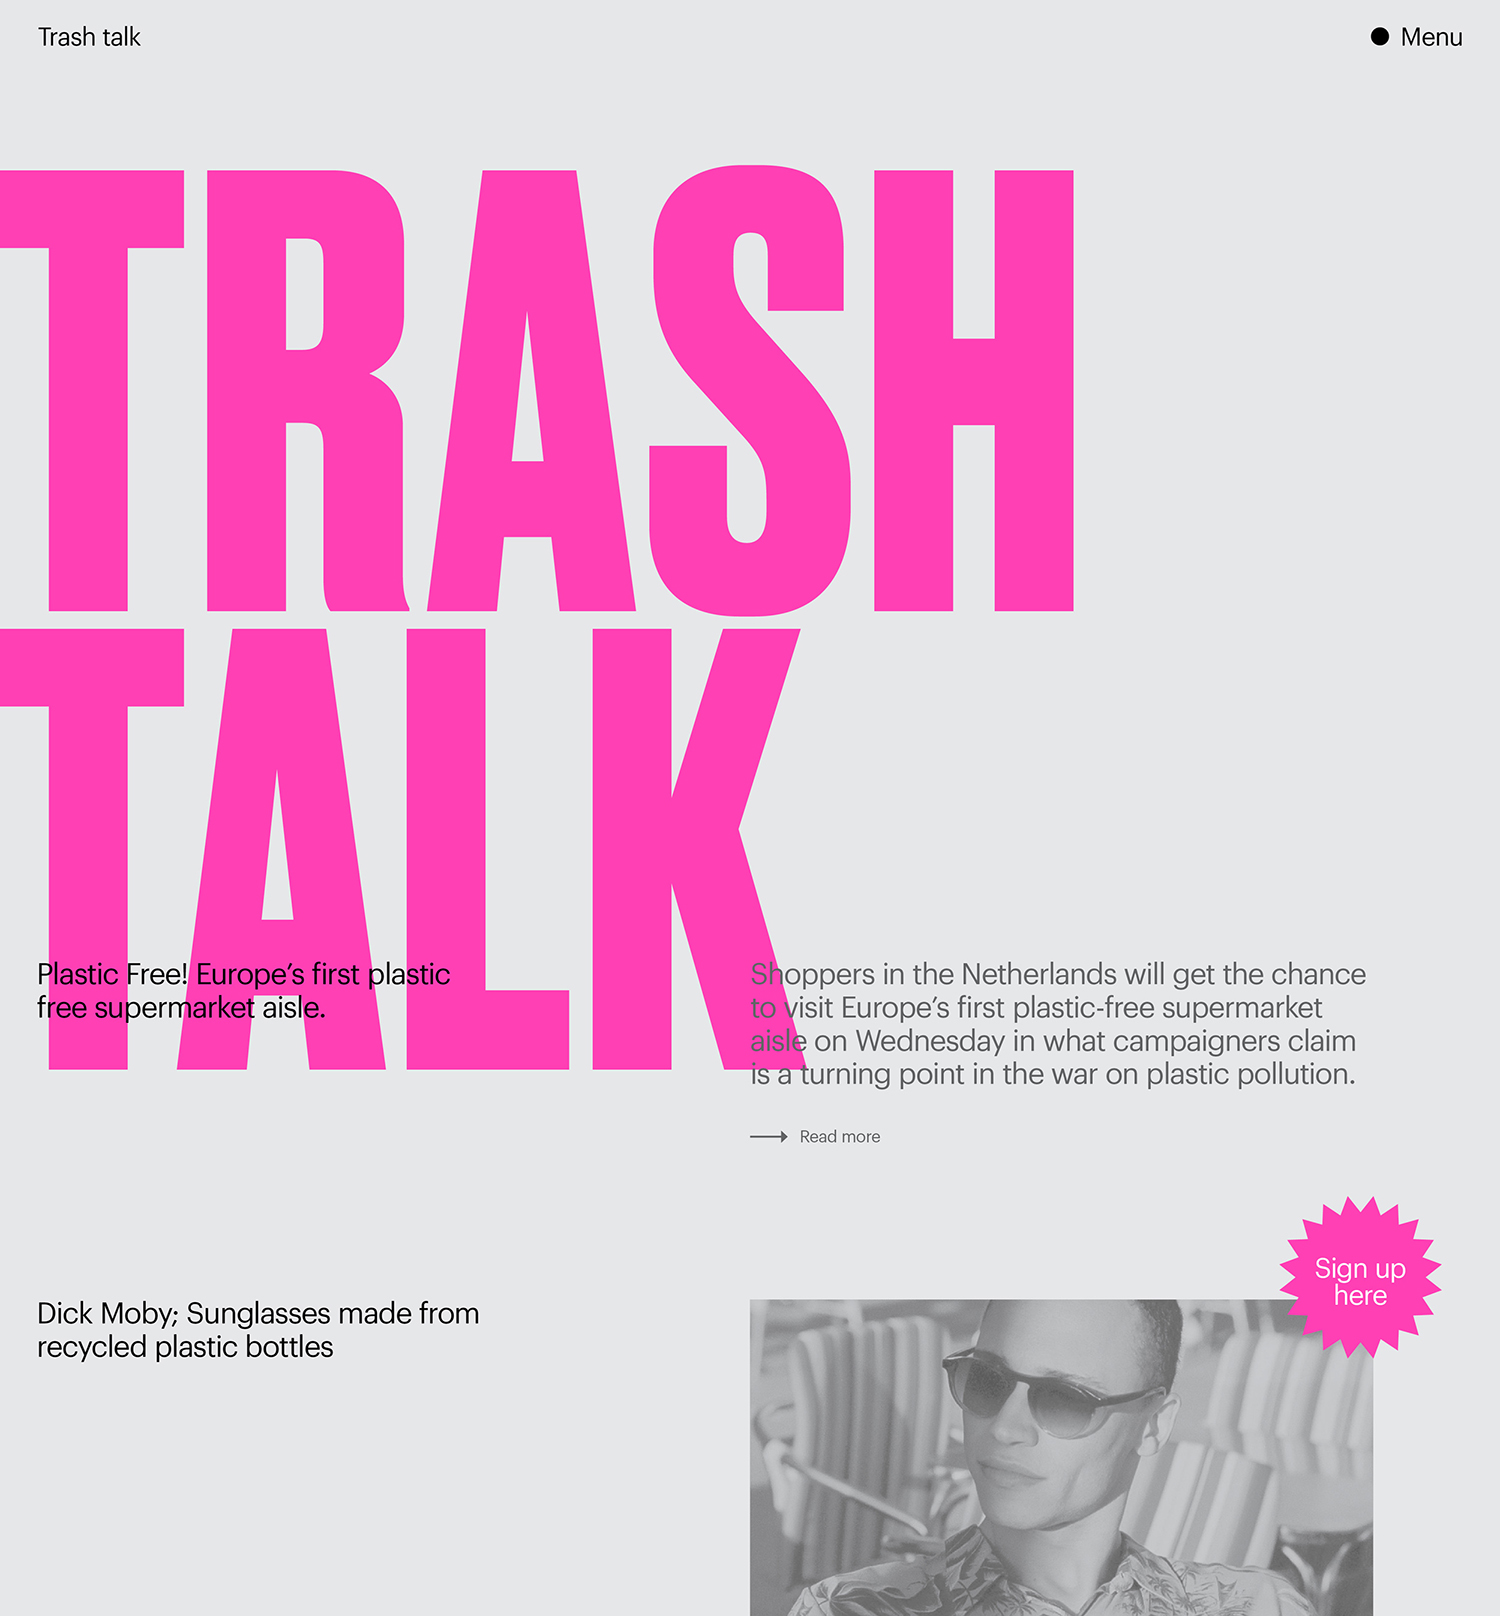 Visual identity and website by Seachange for refuse collection and reuse company Supertrash